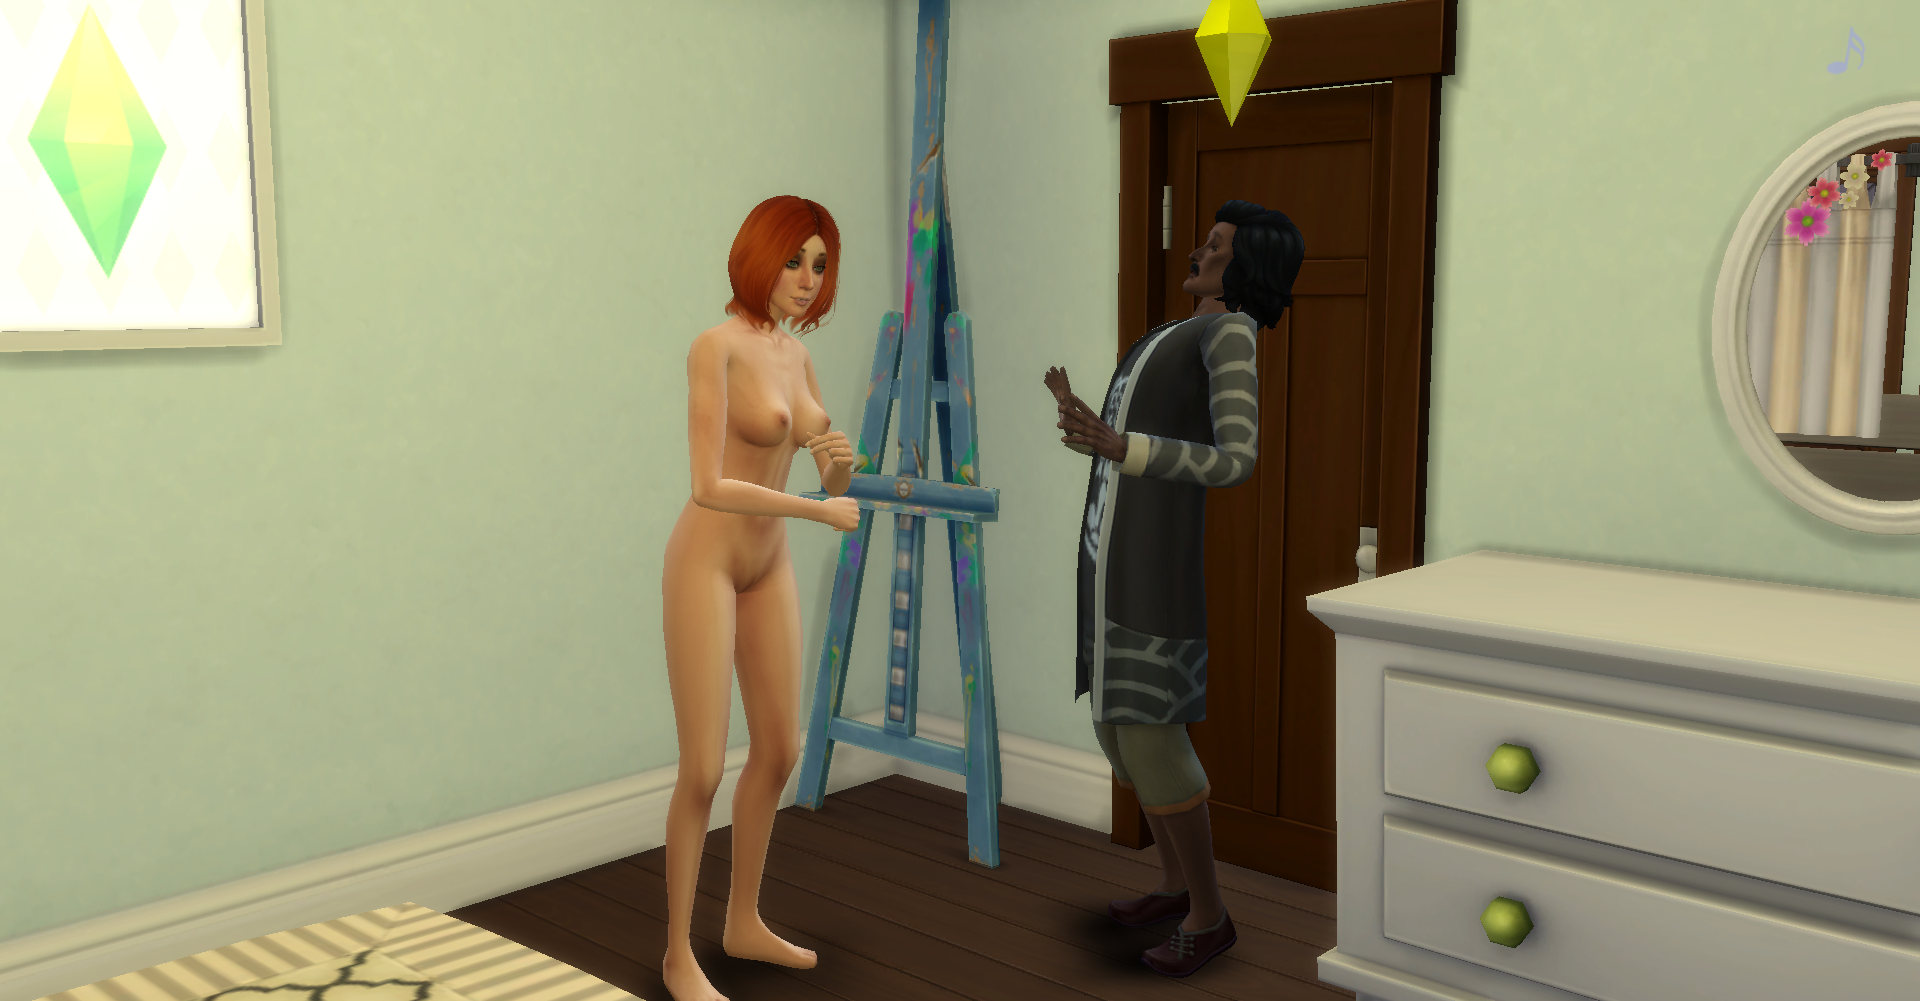 Hot Complications Sims Story Page 6 The Sims 4 General Discussion 